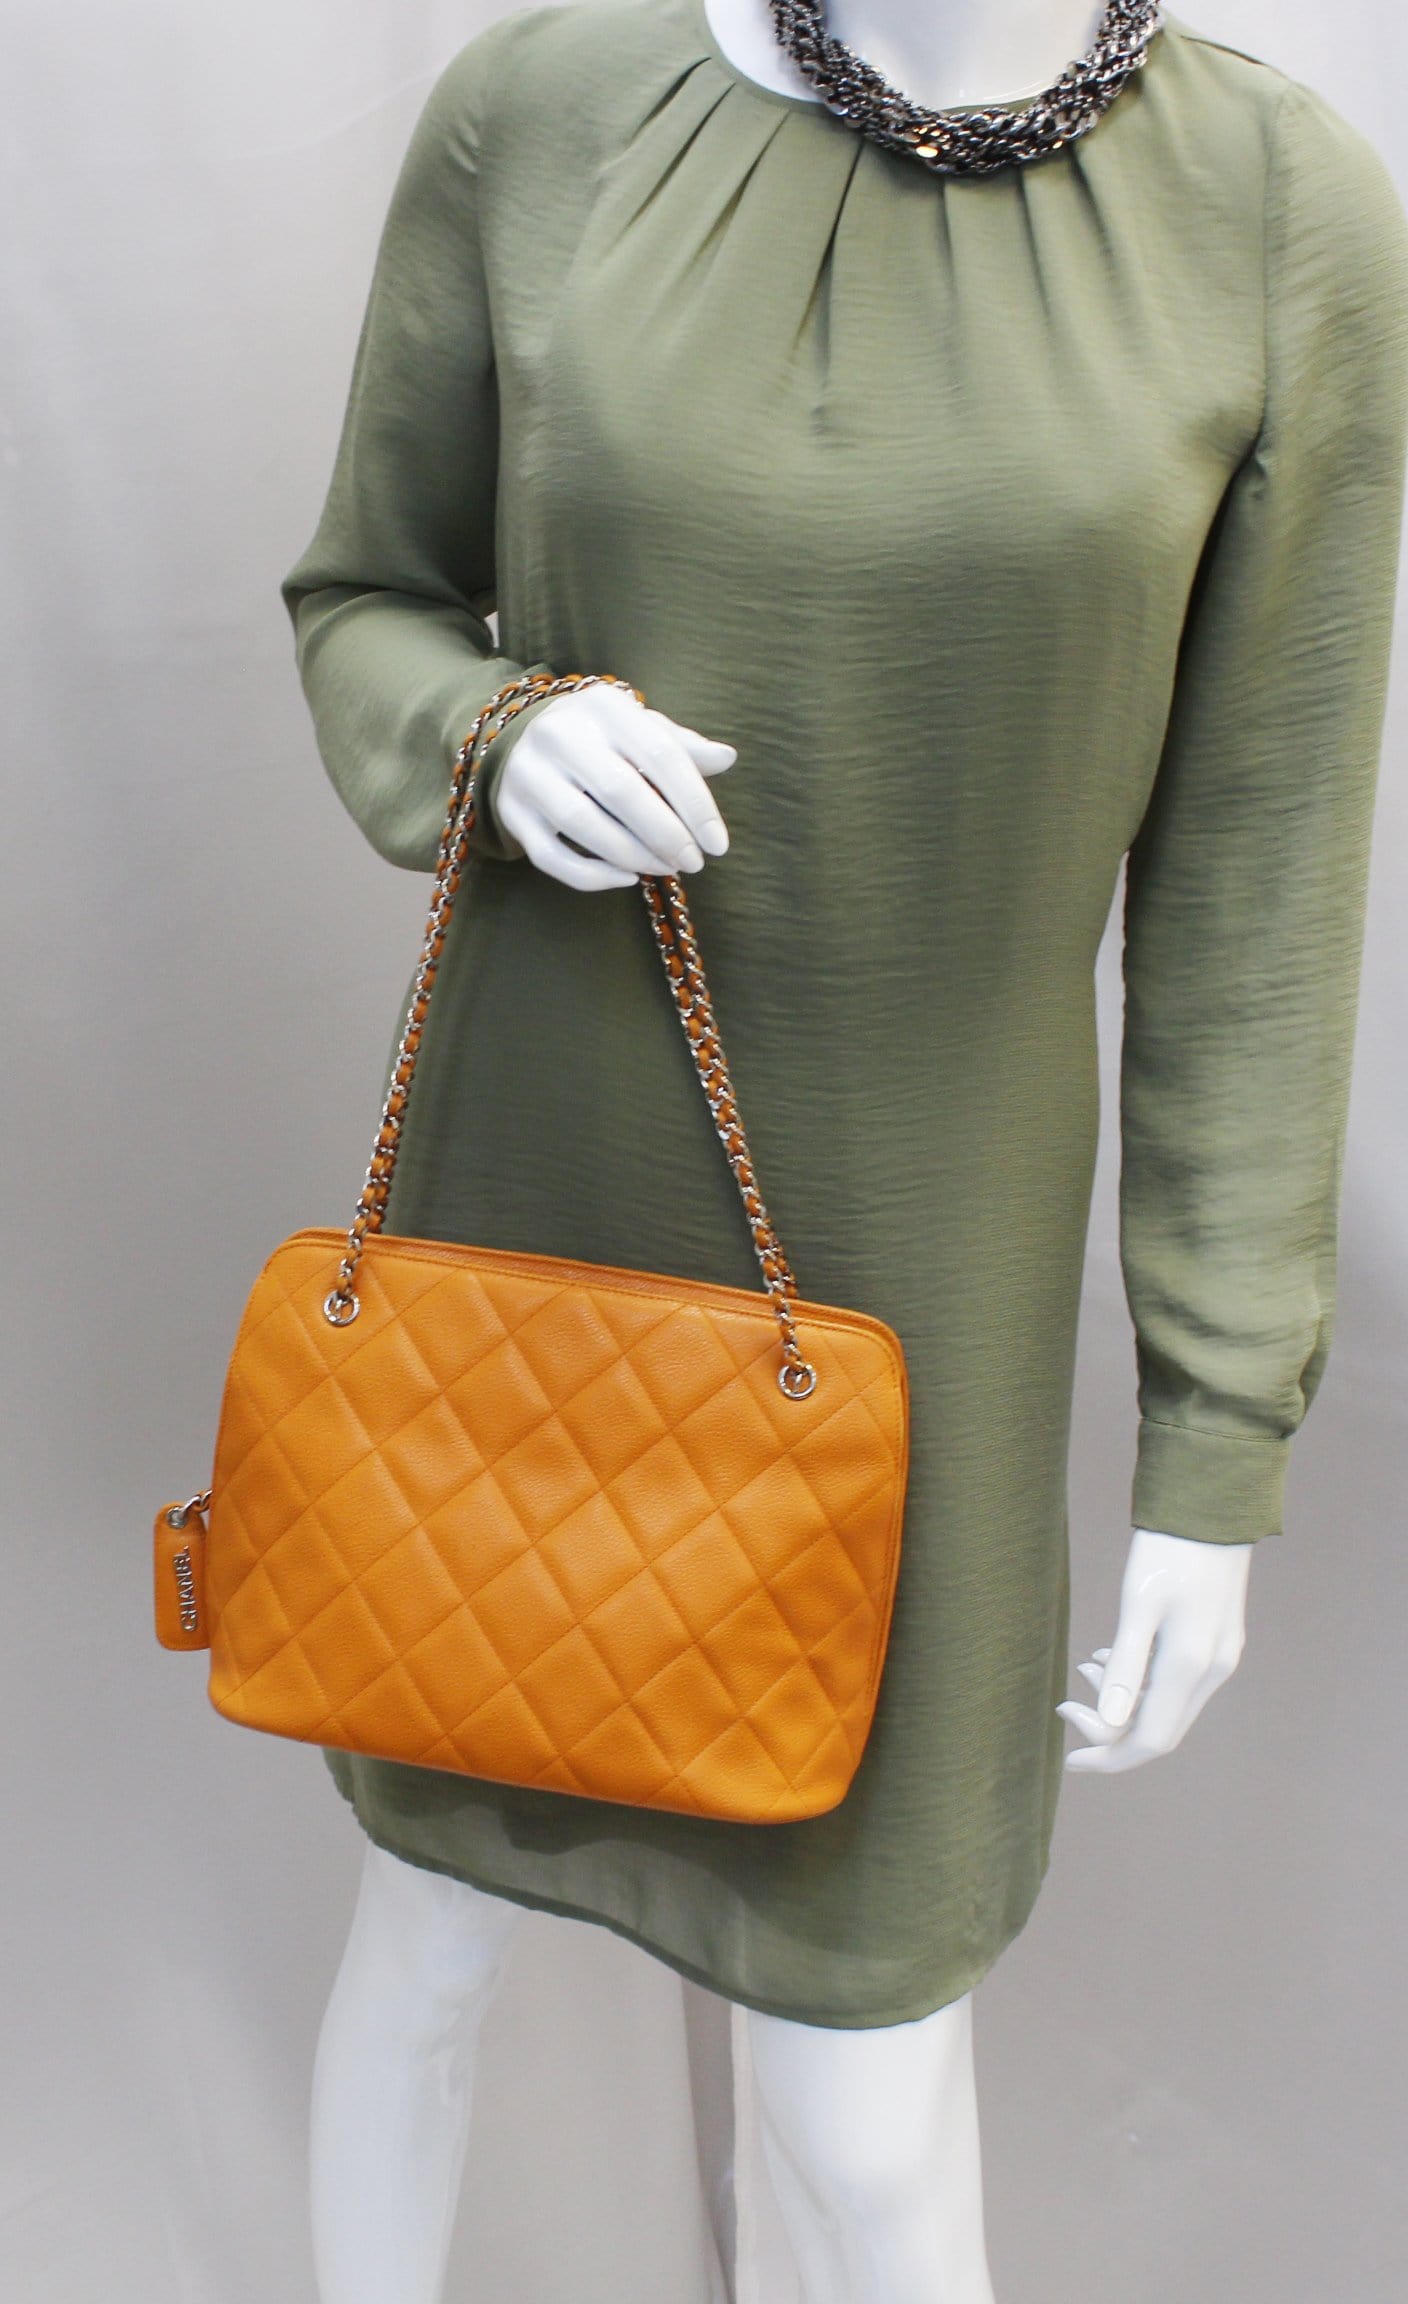 What Goes Around Comes Around Chanel Patent Boy Small Bag in Orange